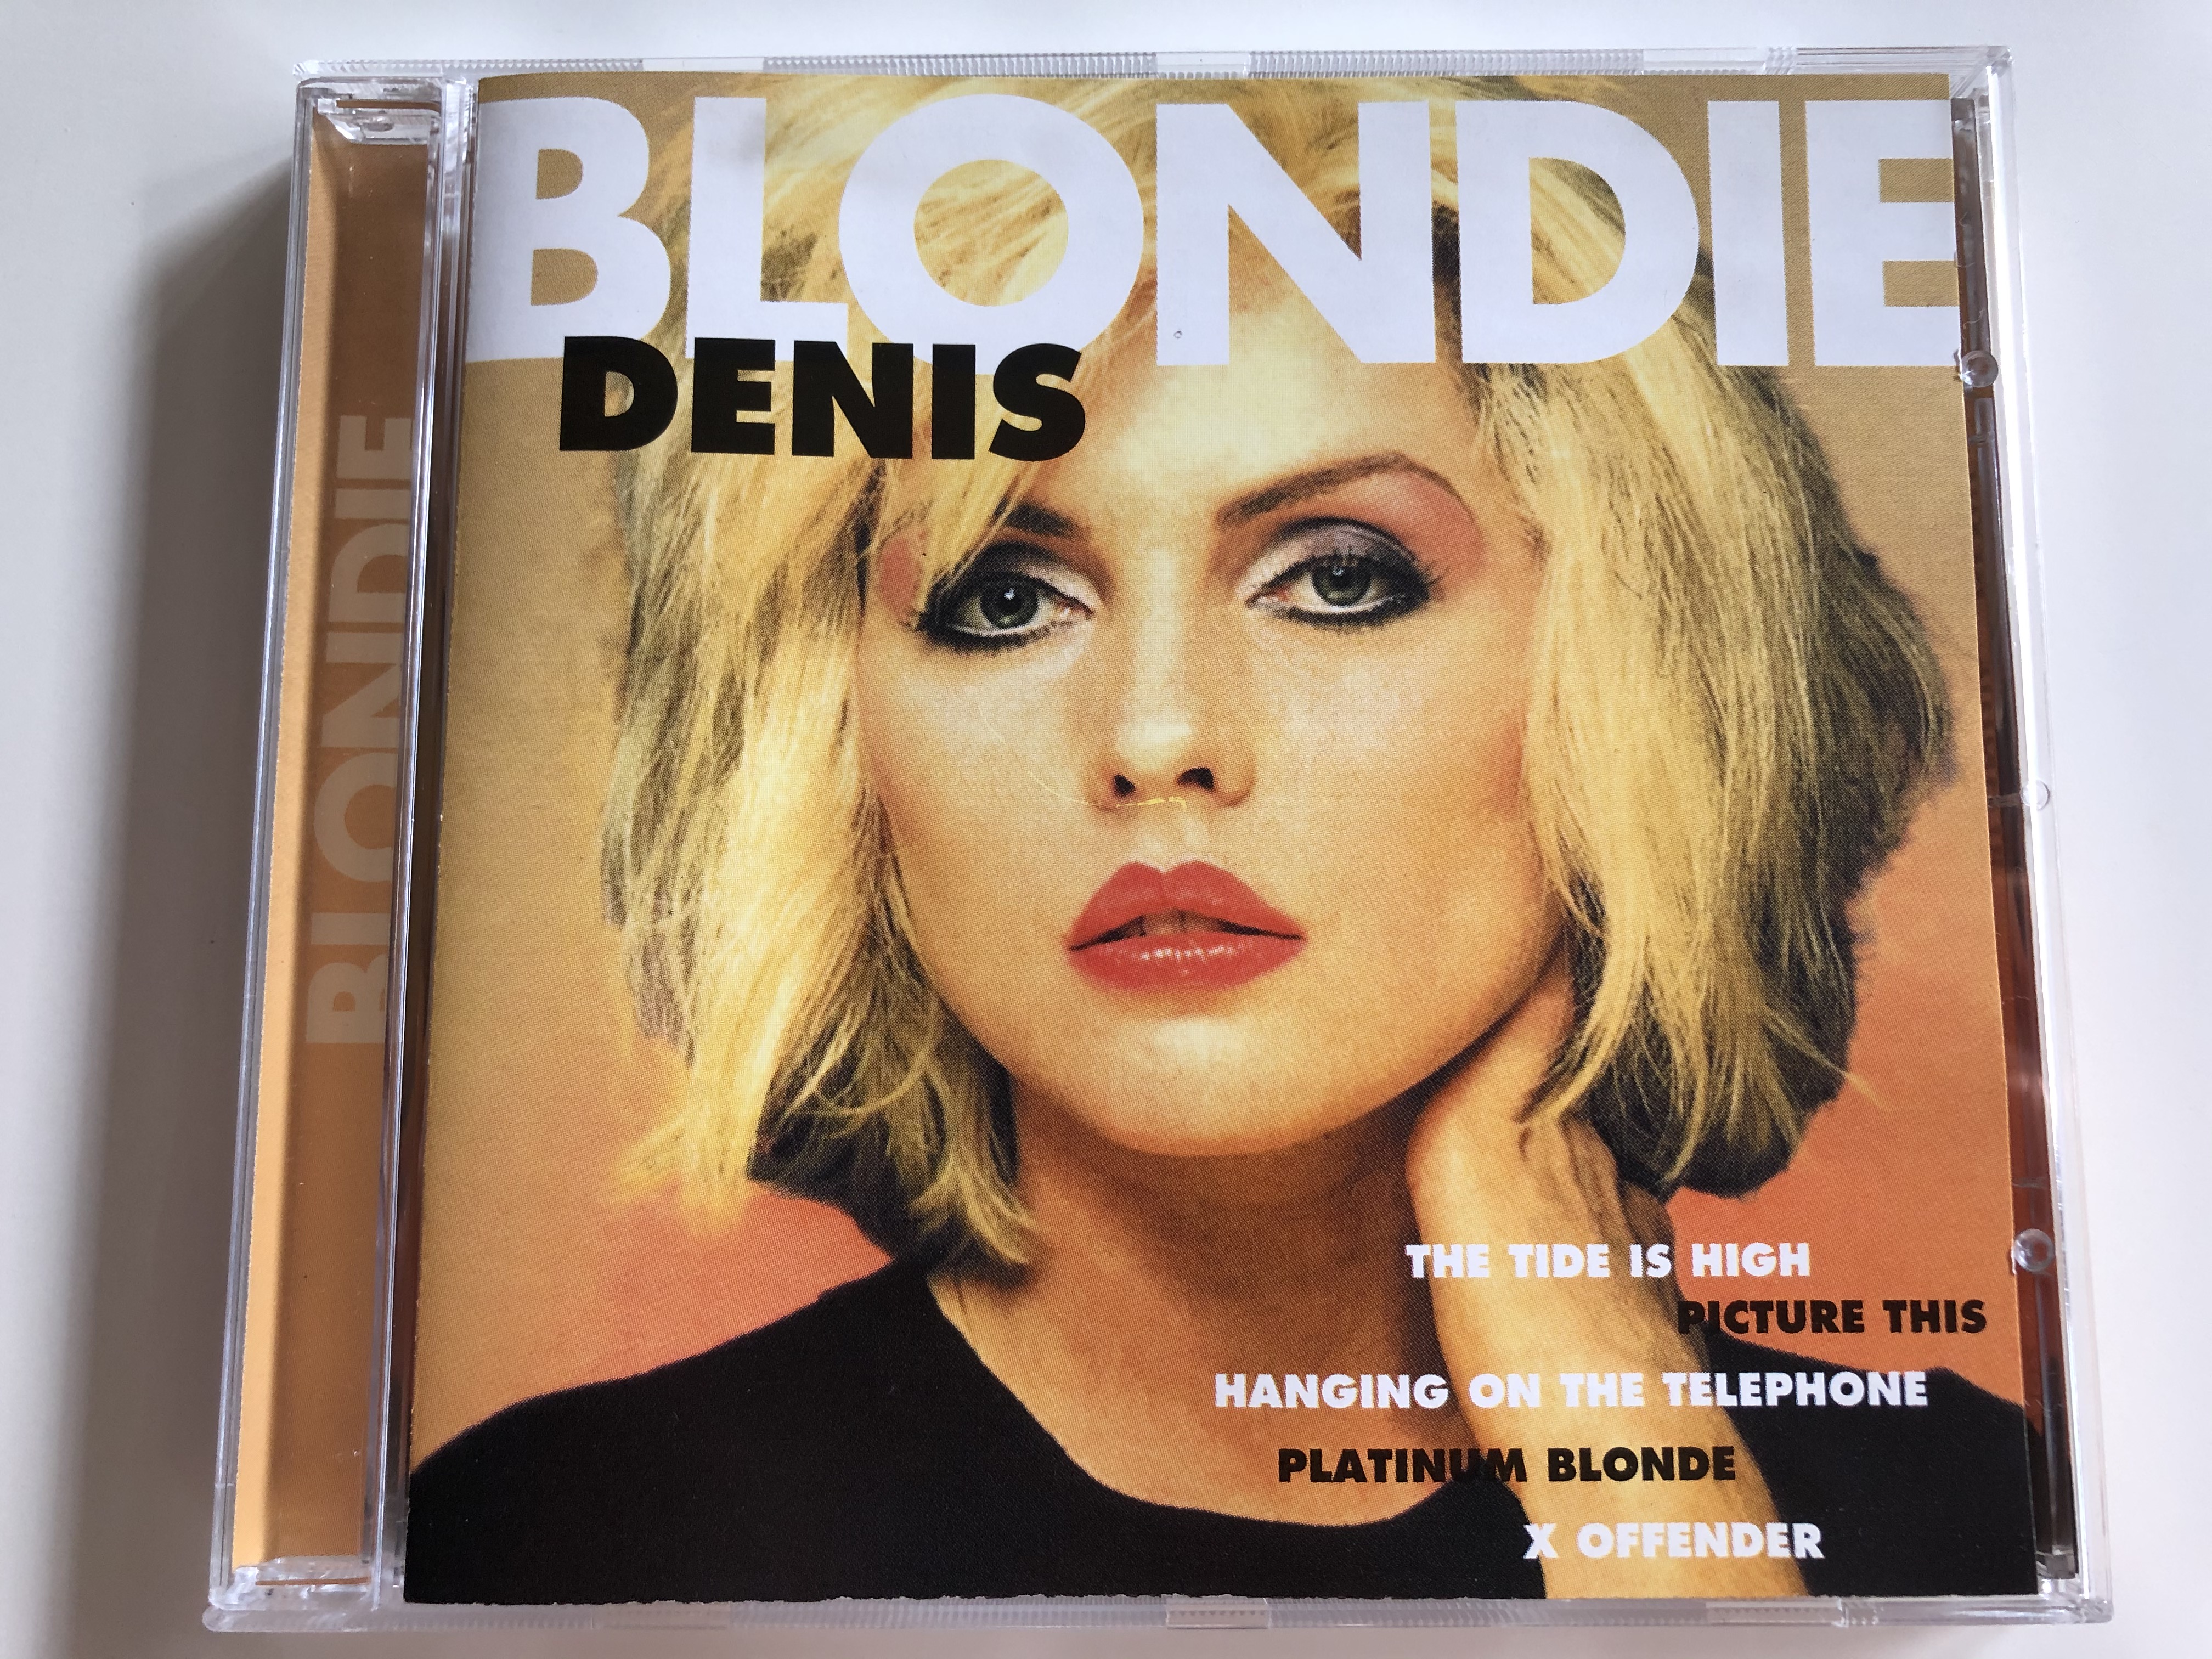 blondie-denis-the-tide-is-high-picture-this-hanging-on-the-telephone-platinum-blonde-x-offender-disky-audio-cd-1996-dc-867192-1-.jpg